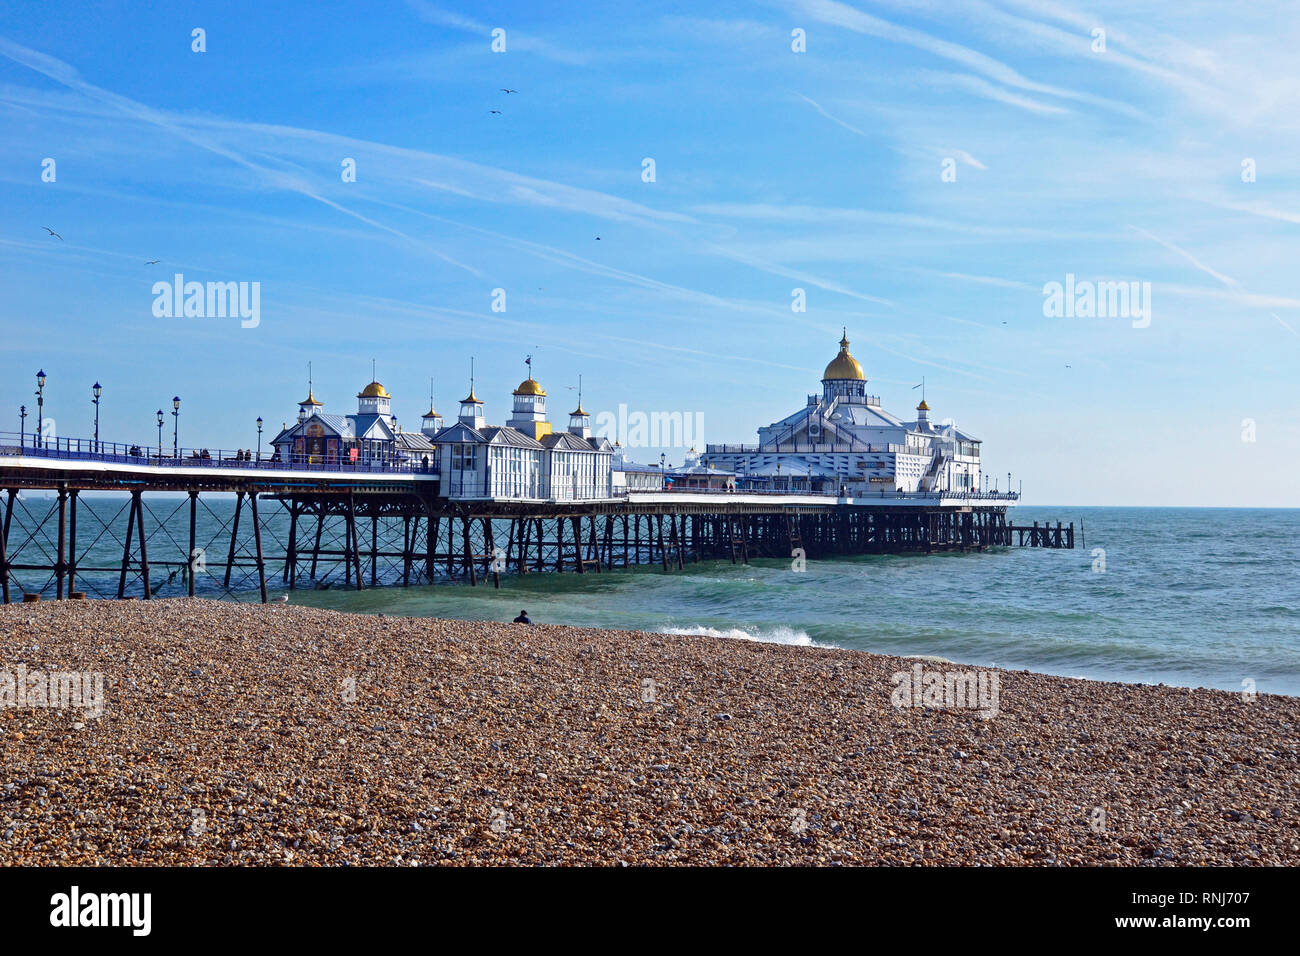 Eastbourne Pier, Eastbourne, East Sussex, UK. Brilliant sunshine brings people out to enjoy the seafront in February. View from the promenade. Stock Photo